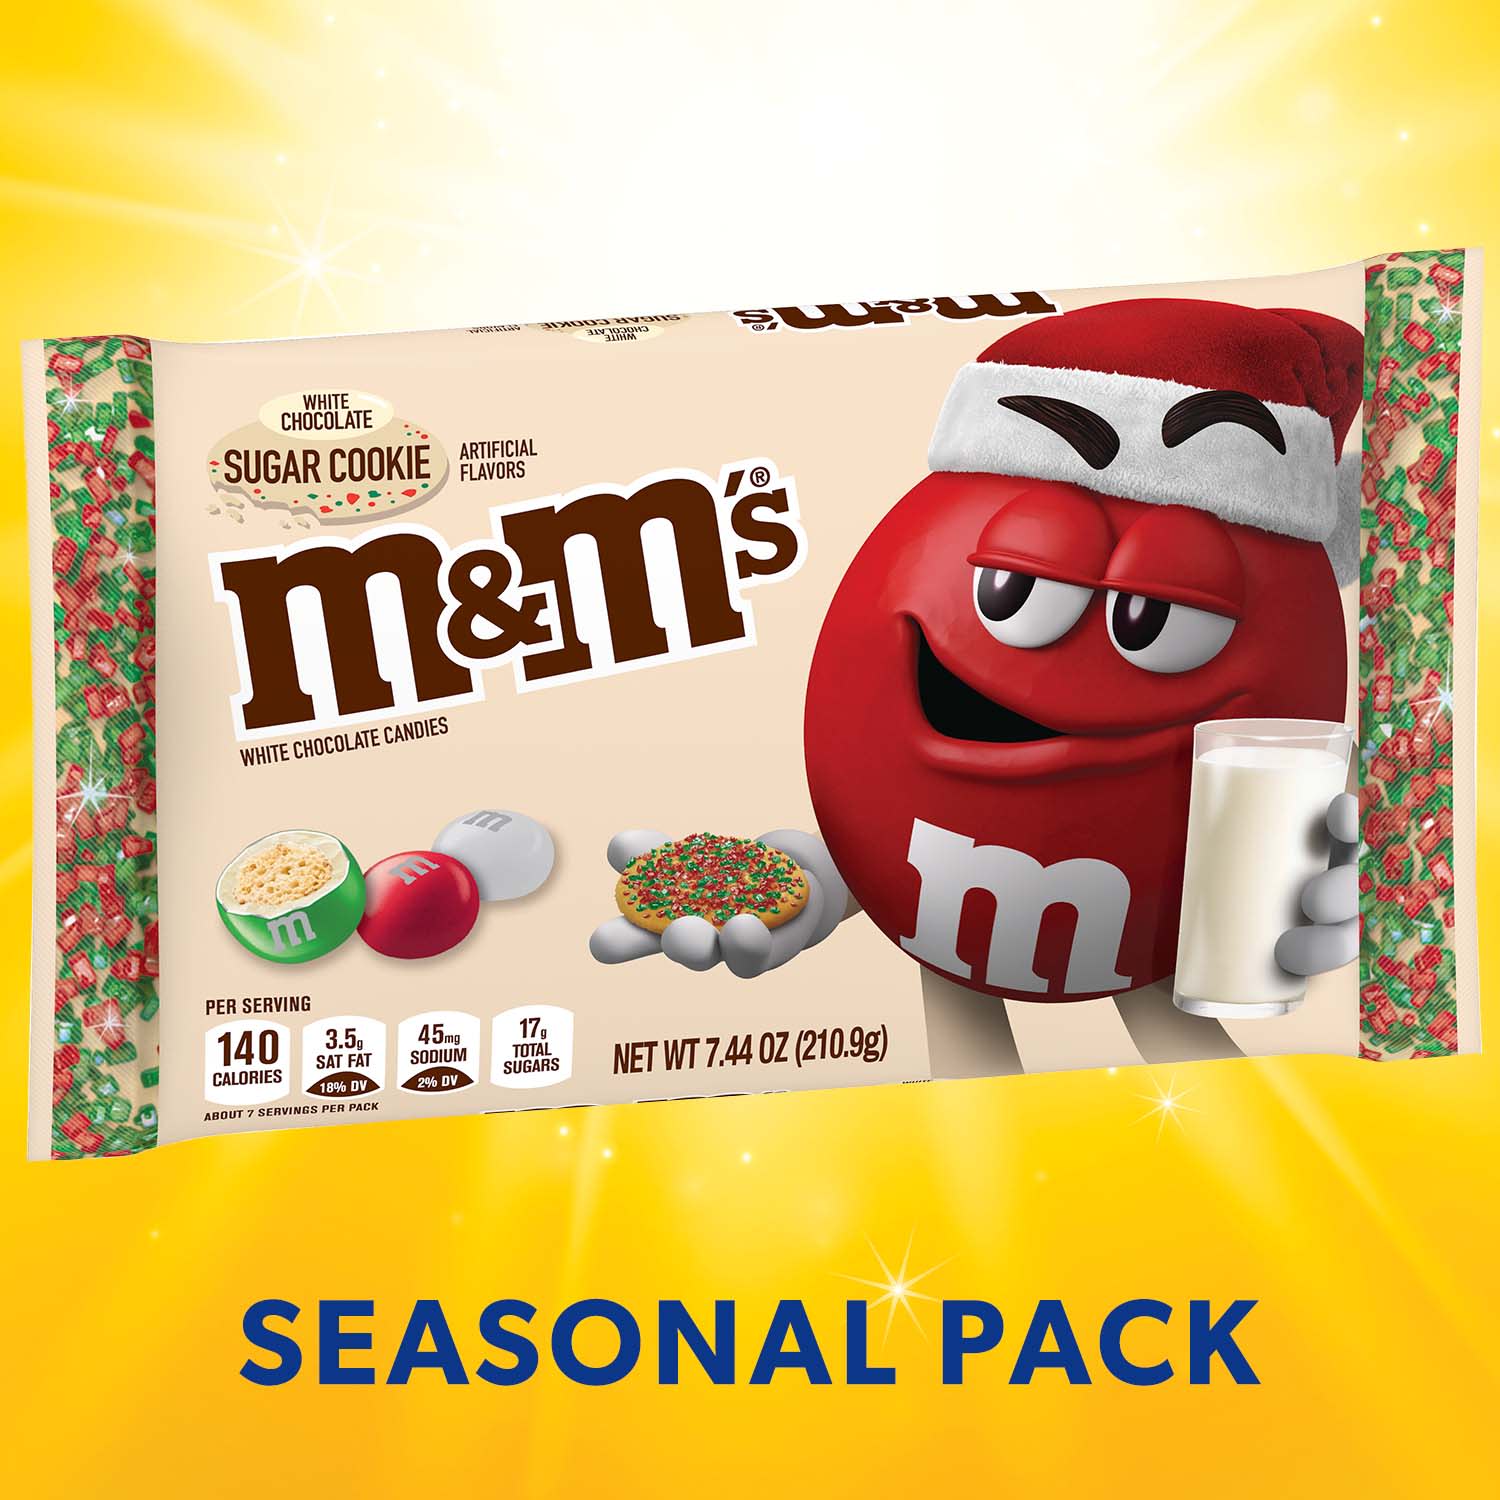 M&M'S Christmas White Chocolate Sugar Cookie Candy - image 4 of 10